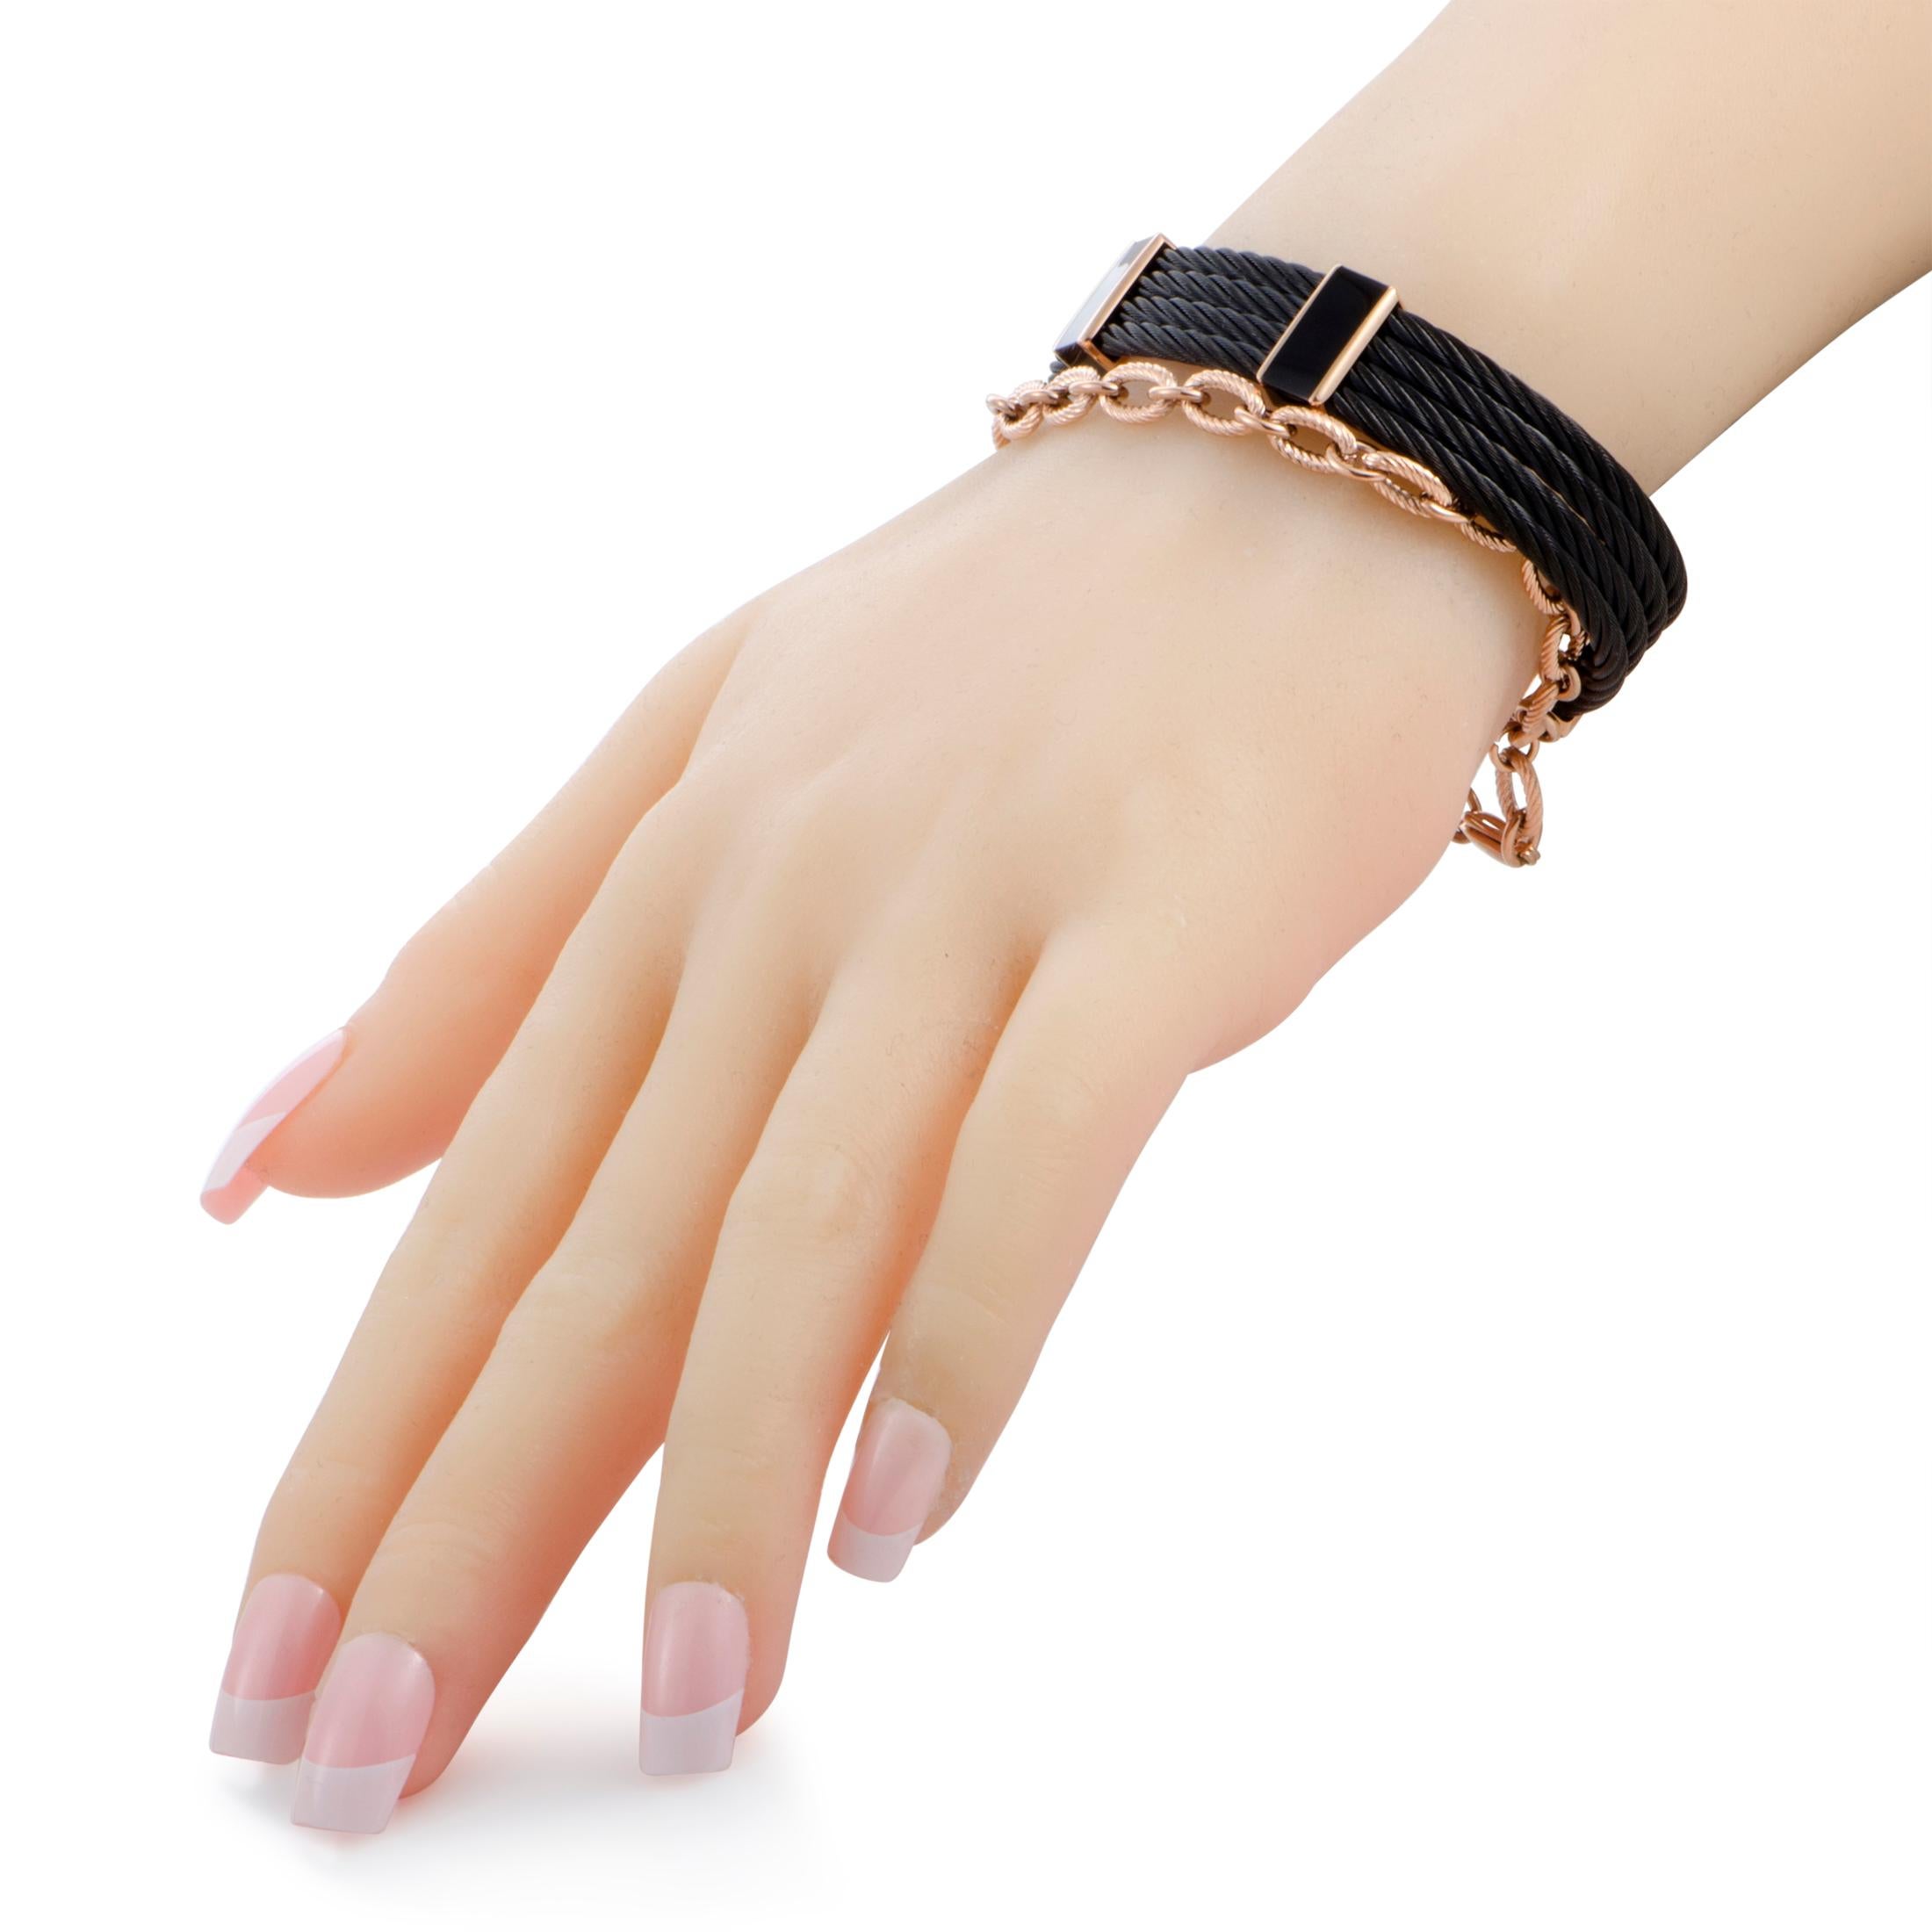 This exquisite “St. Tropez” bracelet from Charriol boasts a most compellingly imaginative design presented in stainless steel that is coated in attractive pink and black PVD. The bracelet is also decorated with black lacquer.